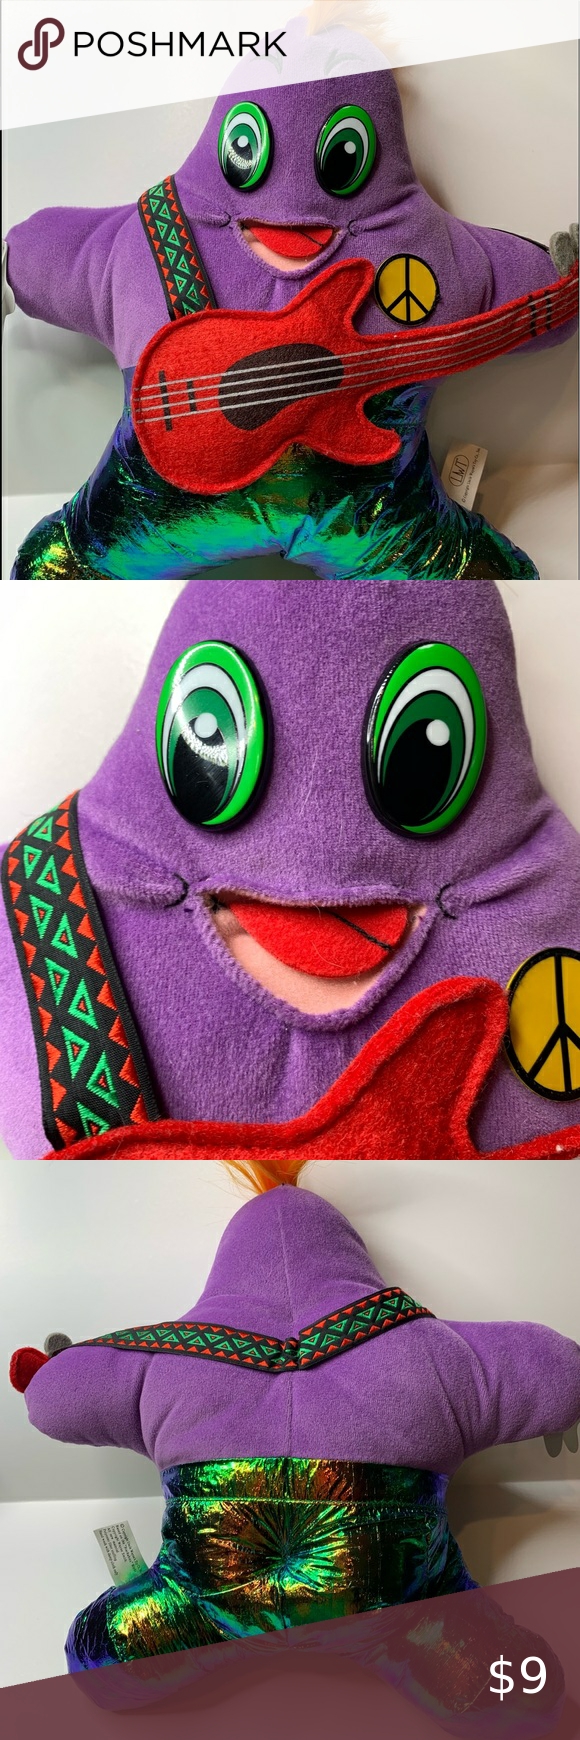 A panel of three images of the Rock Star plush: top is from the front, middle is a closeup on his face, and the third is from the back. He has a sprig of rooted hair, hard plastic eyes, an open mouth with a felt tongue, shiny pants, and a red guitar